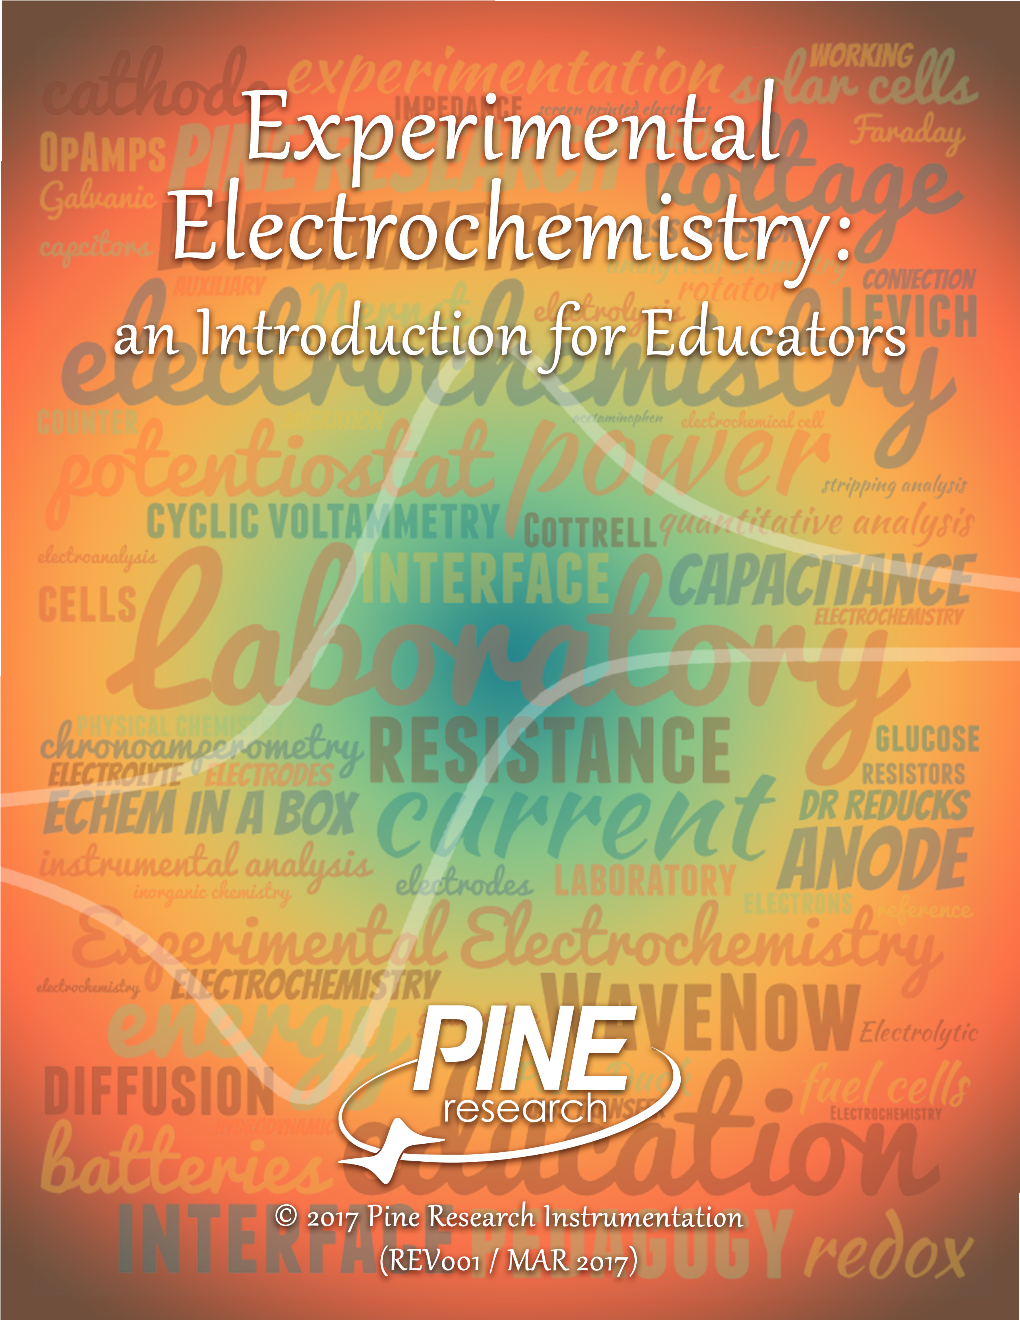 Experimental Electrochemistry: an Introduction for Educators